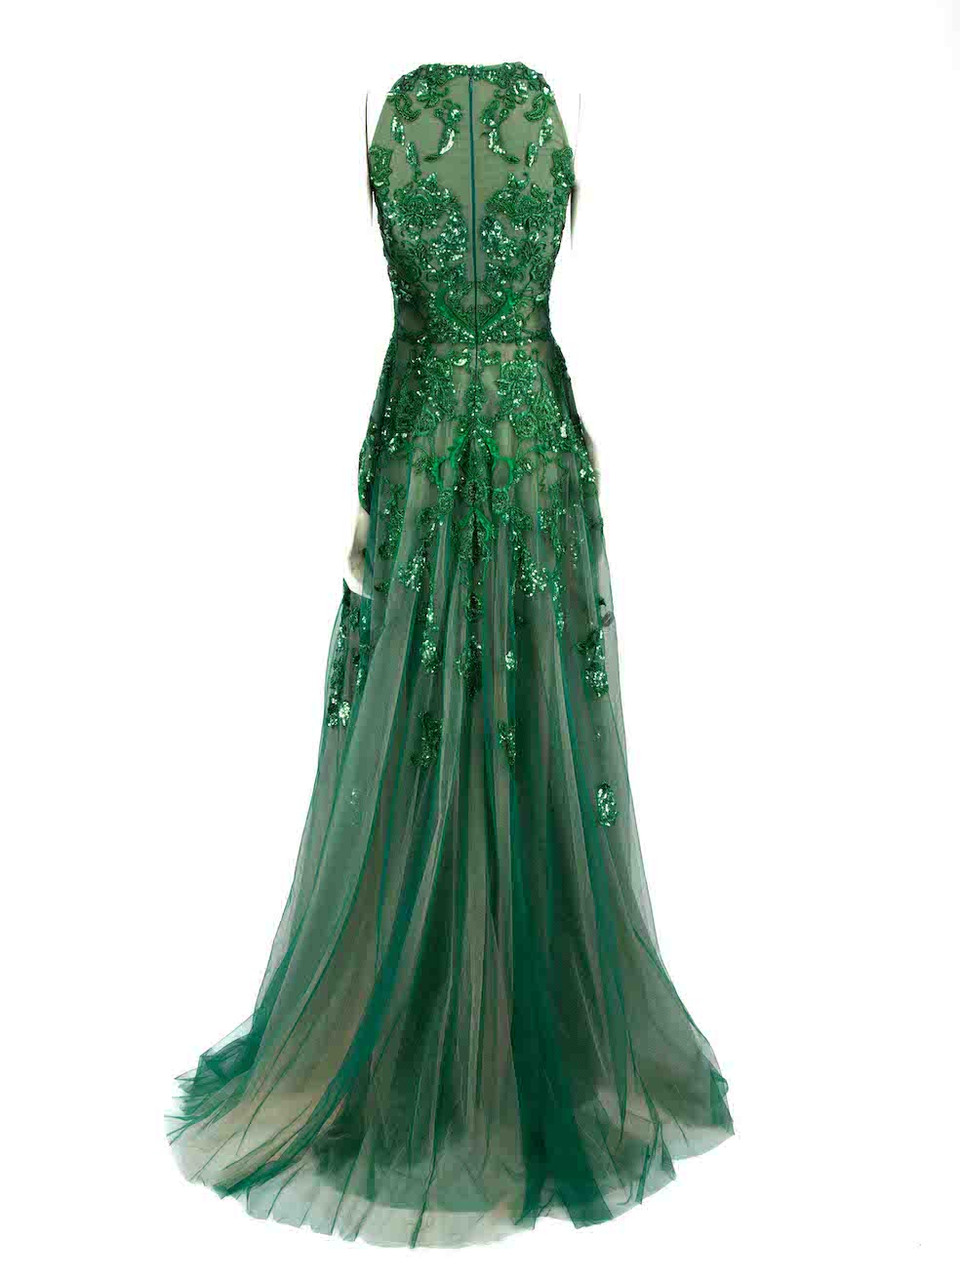 Honayda AW22 Green Tulle Floral Embellished Gown